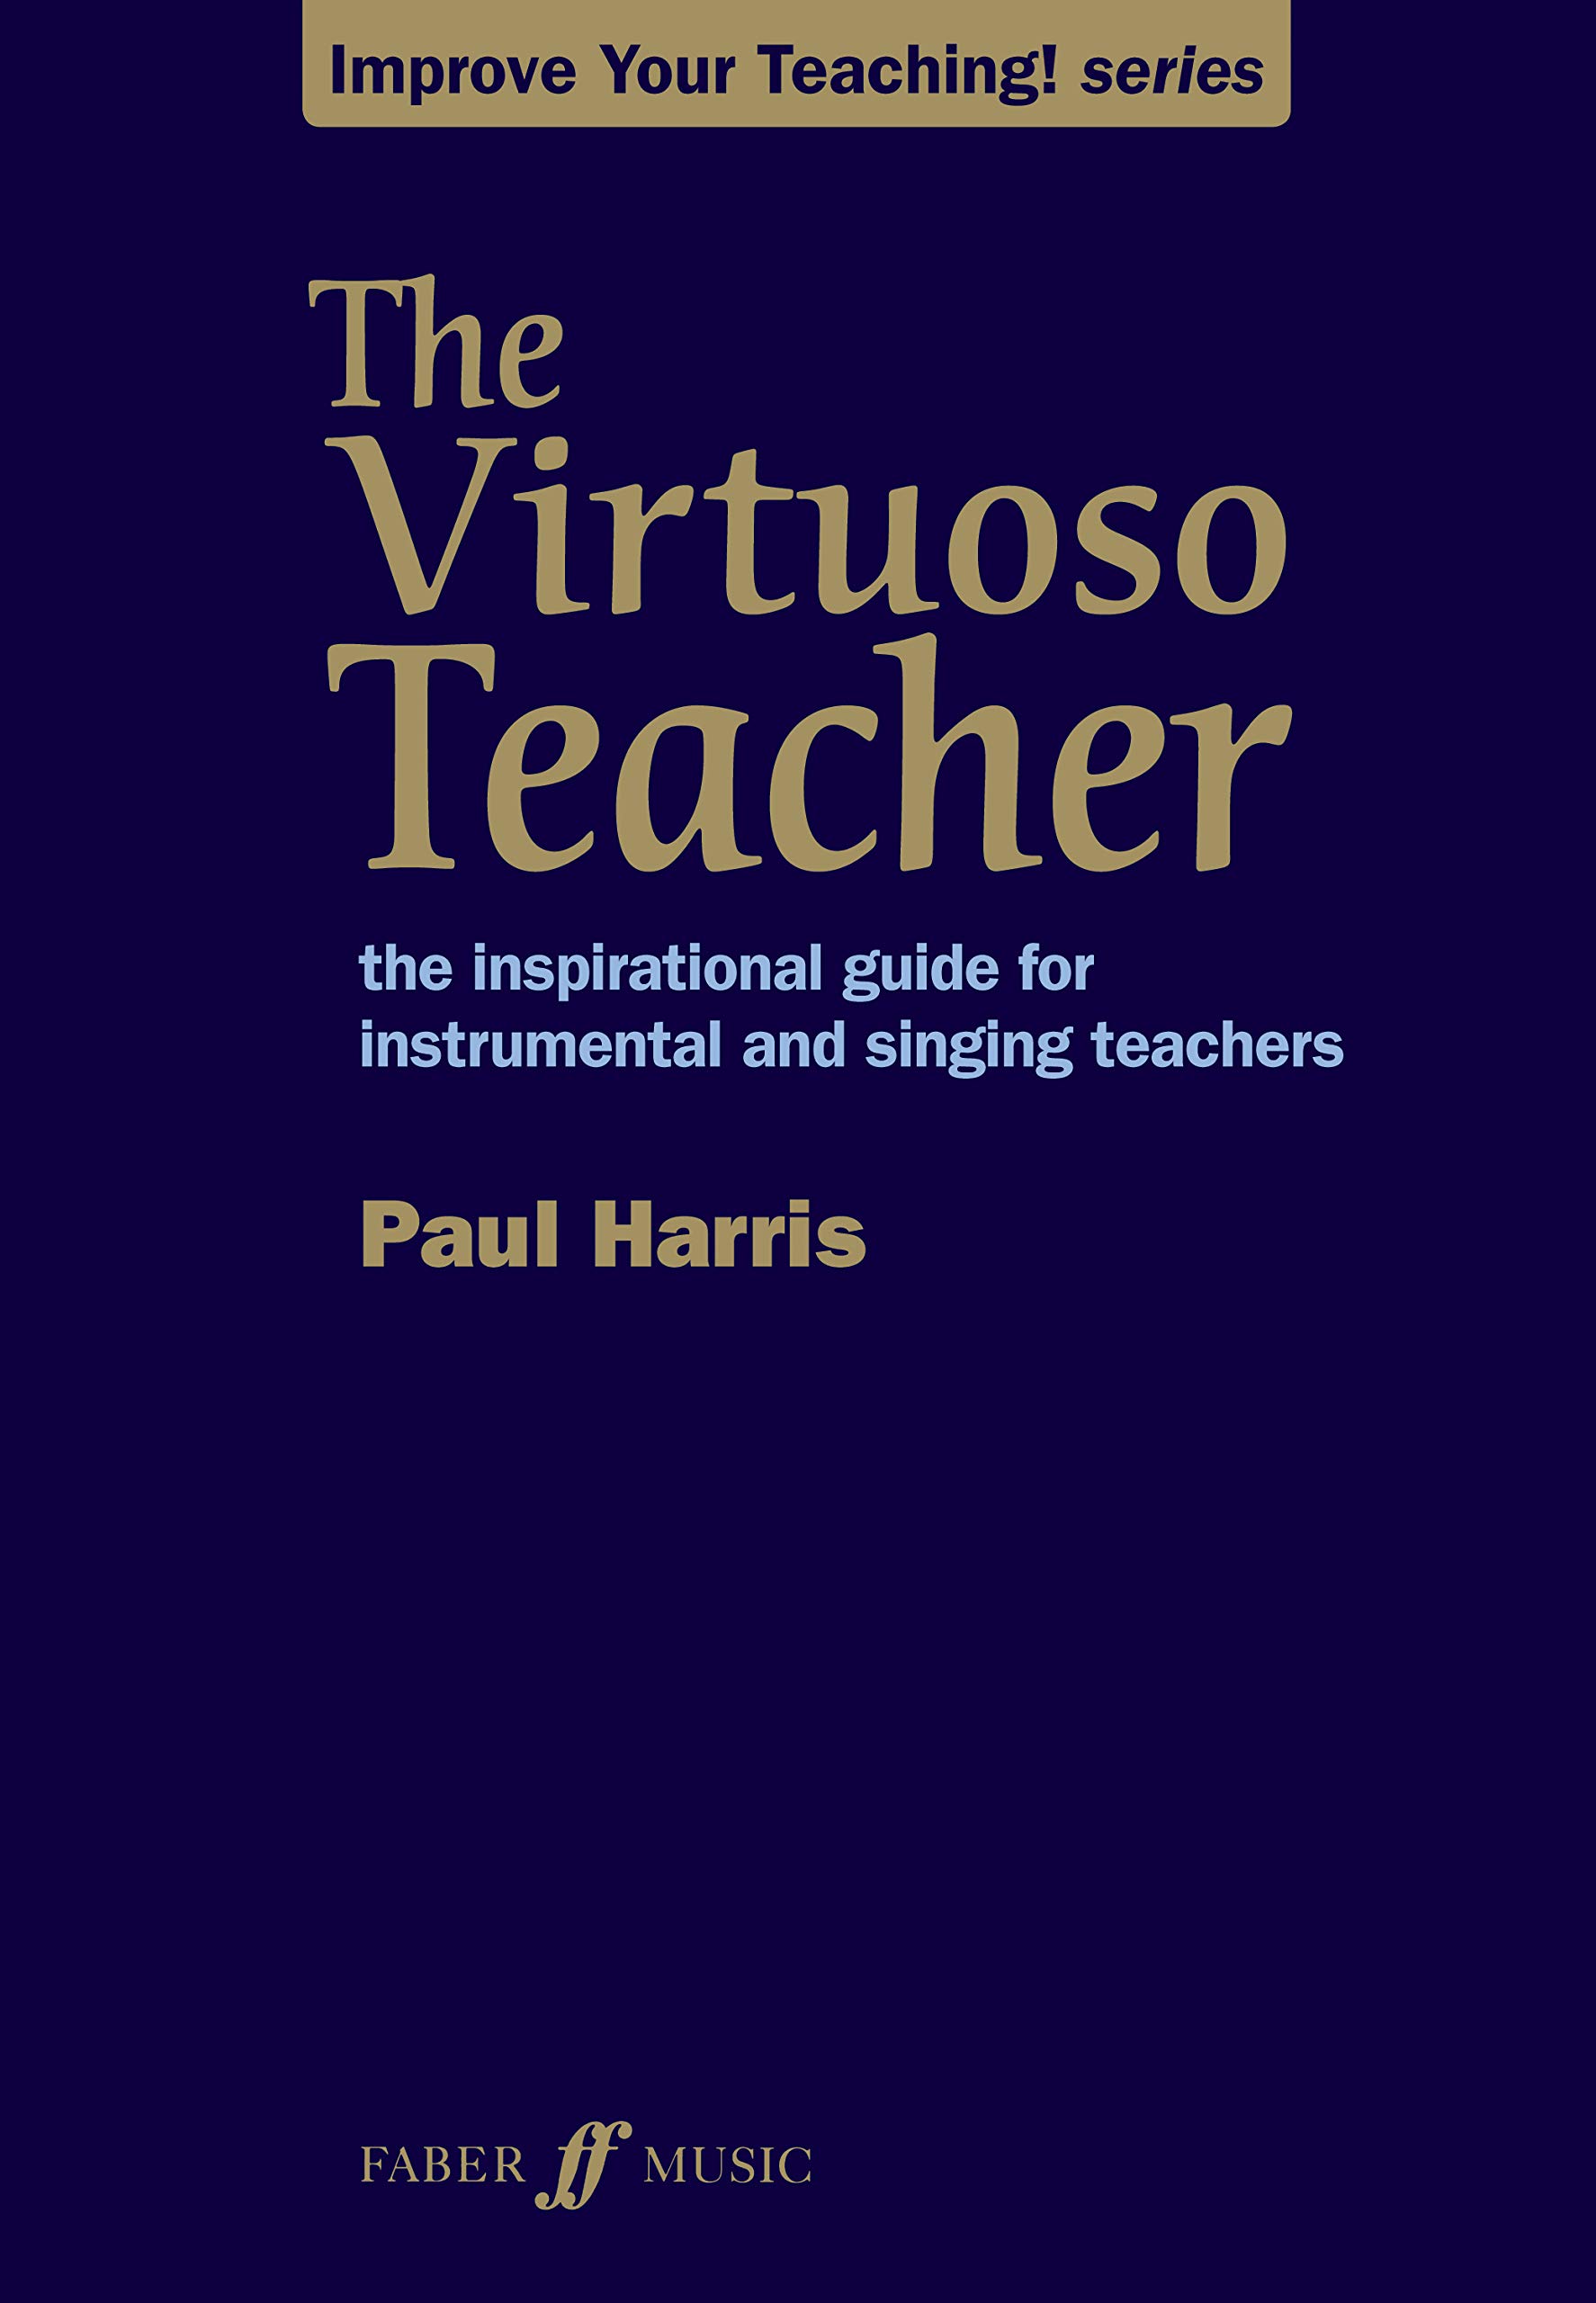 The Virtuoso Teacher: The Inspirational Guide for Instrumental and Singing Teachers